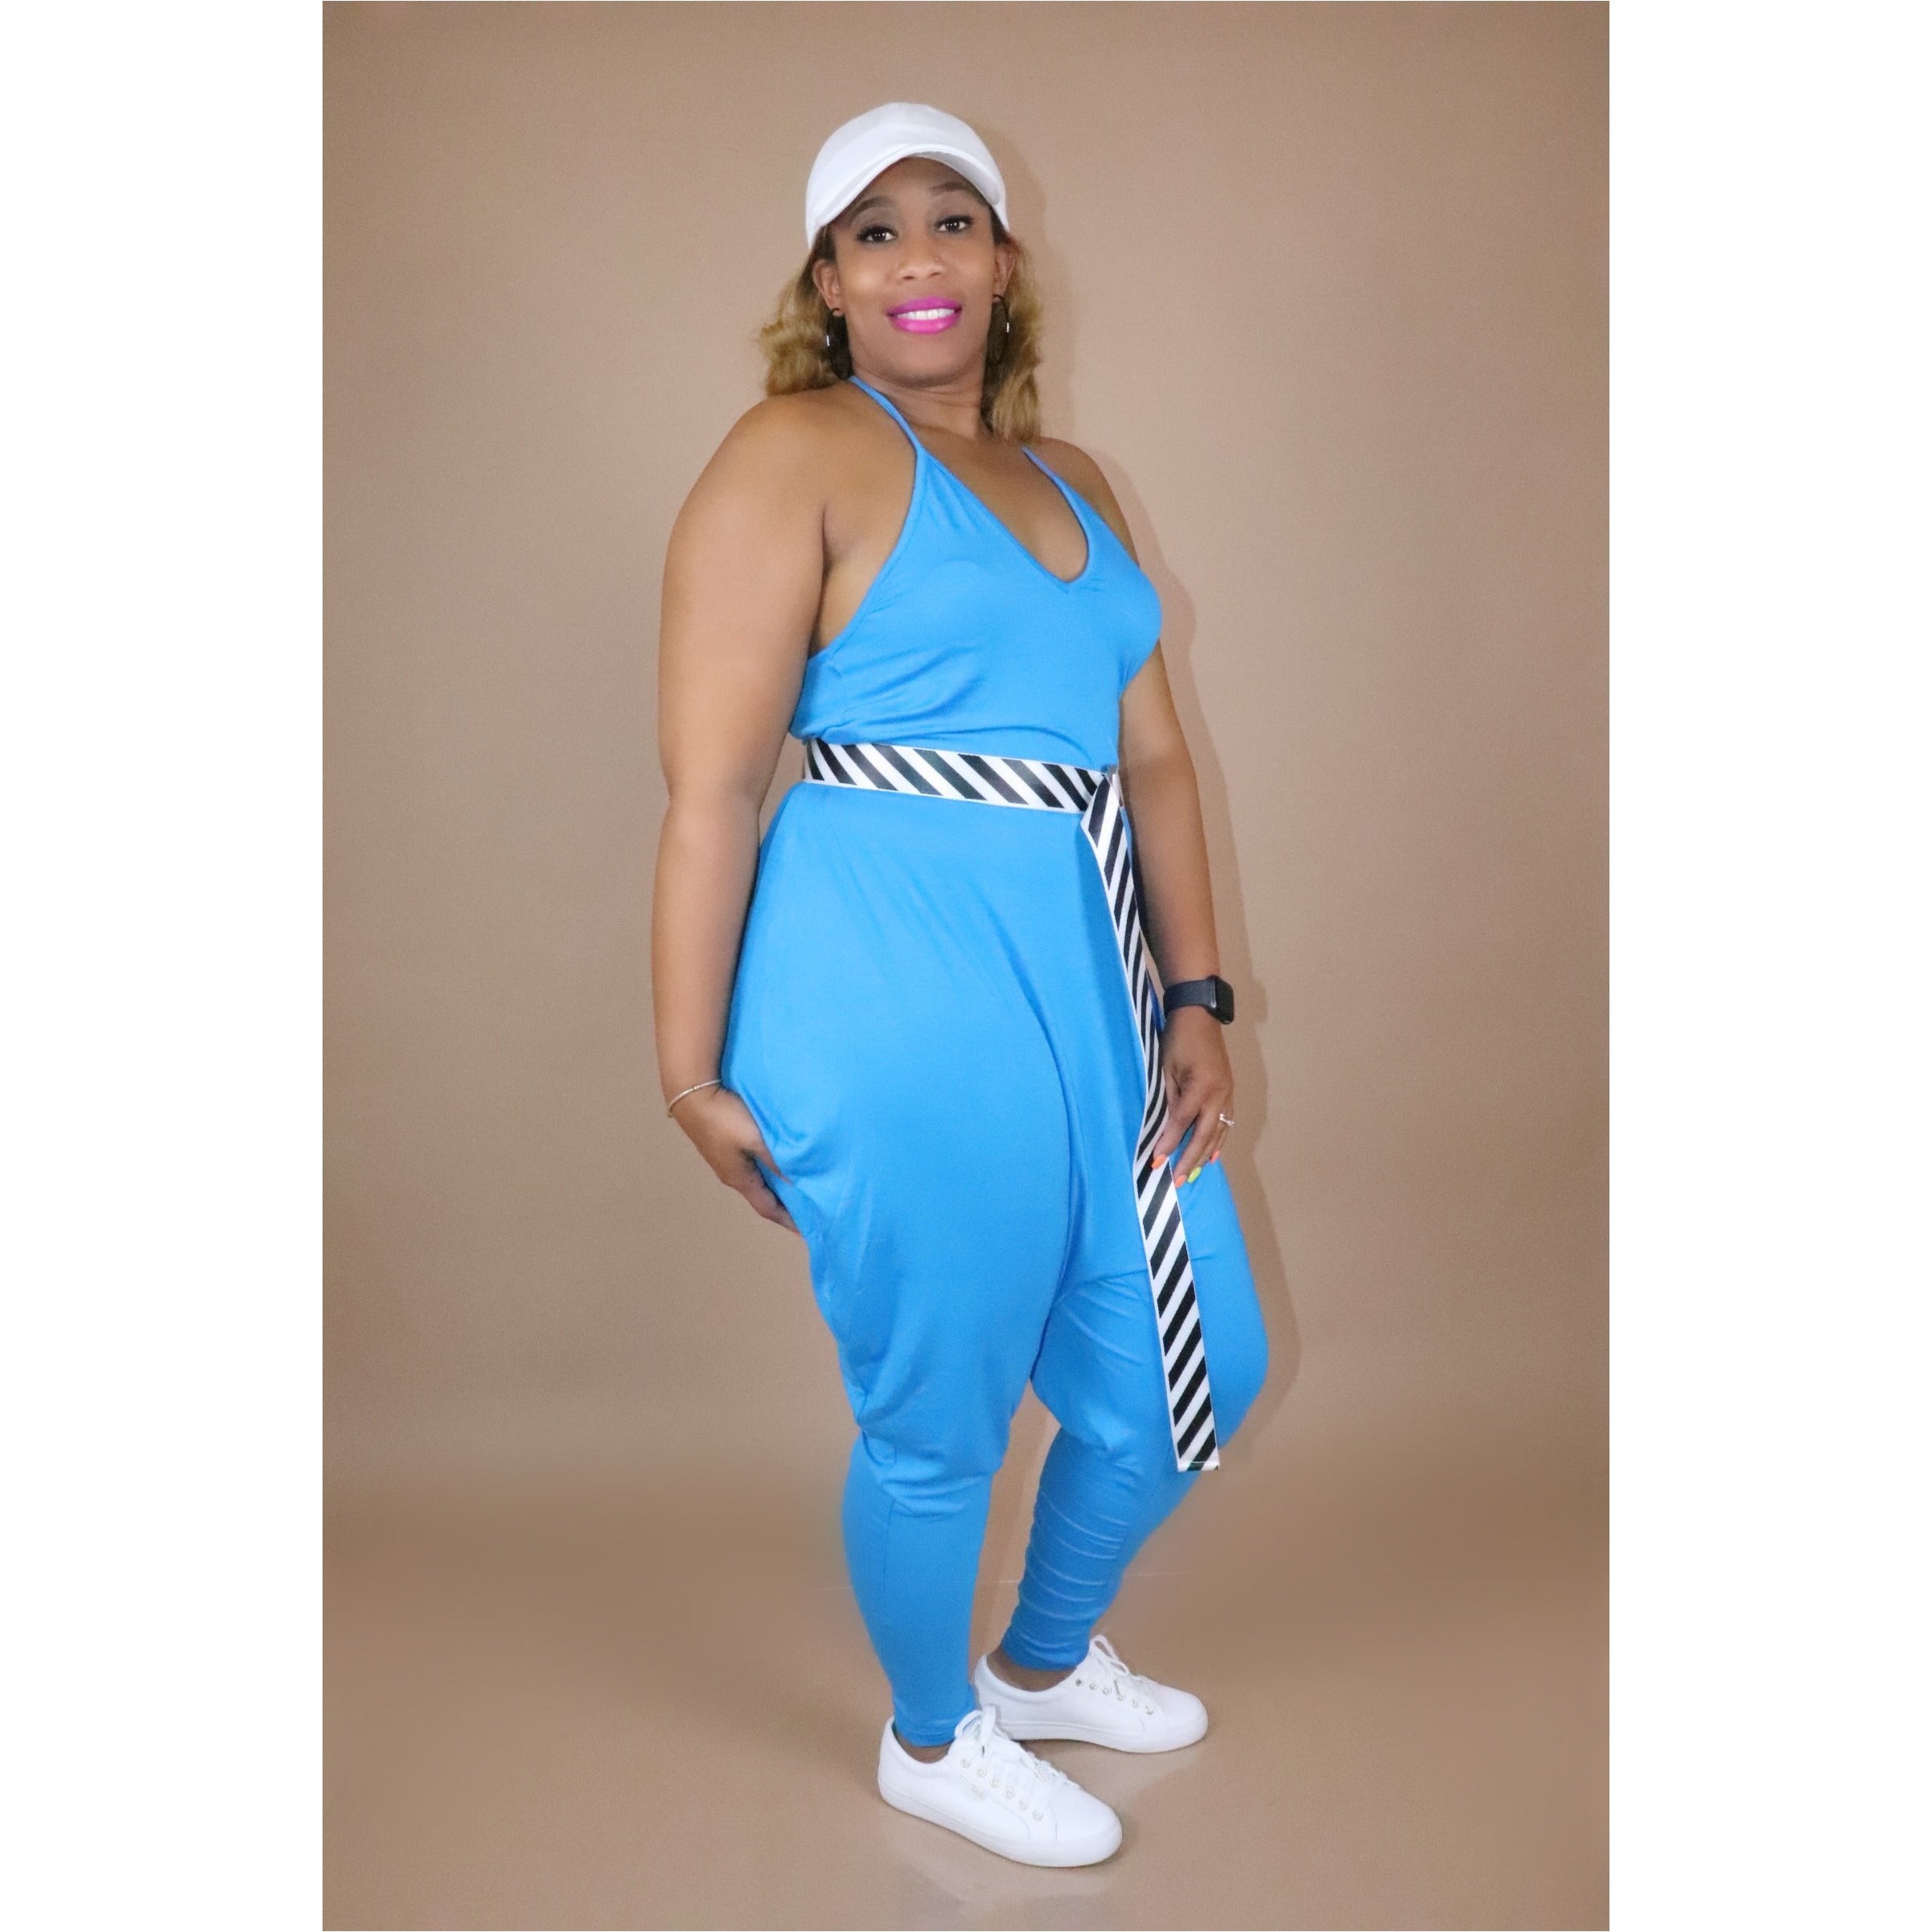 All in One Harem Jumpsuit (Teal Blue)